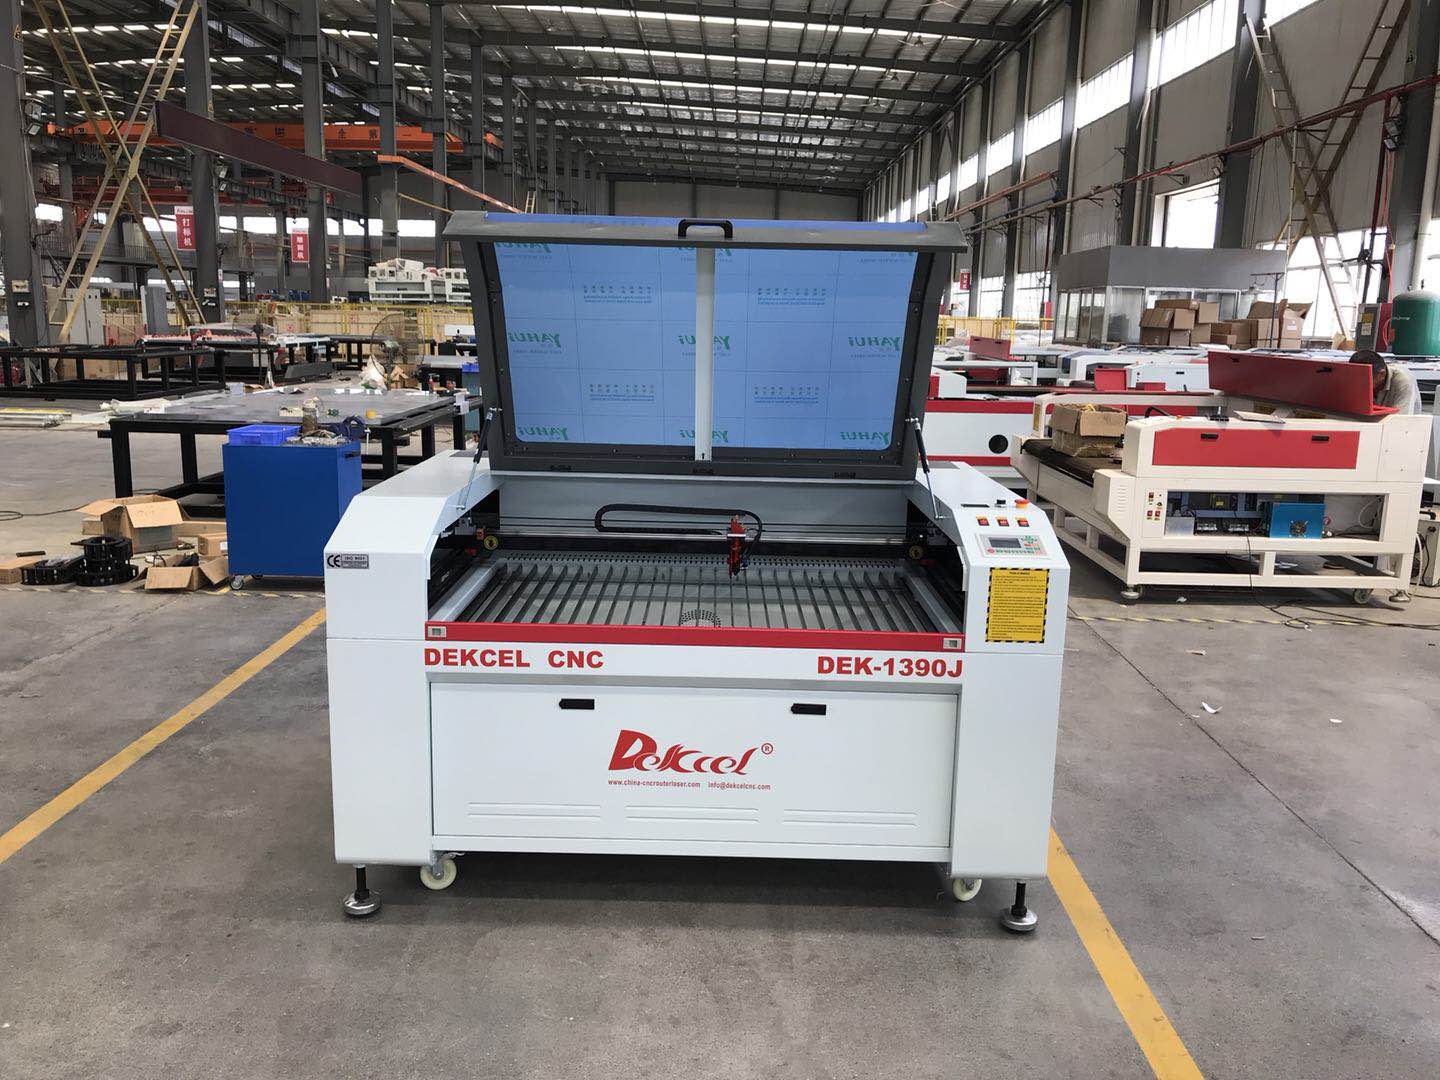 New cnc laser engraving machine ready ship to US from china